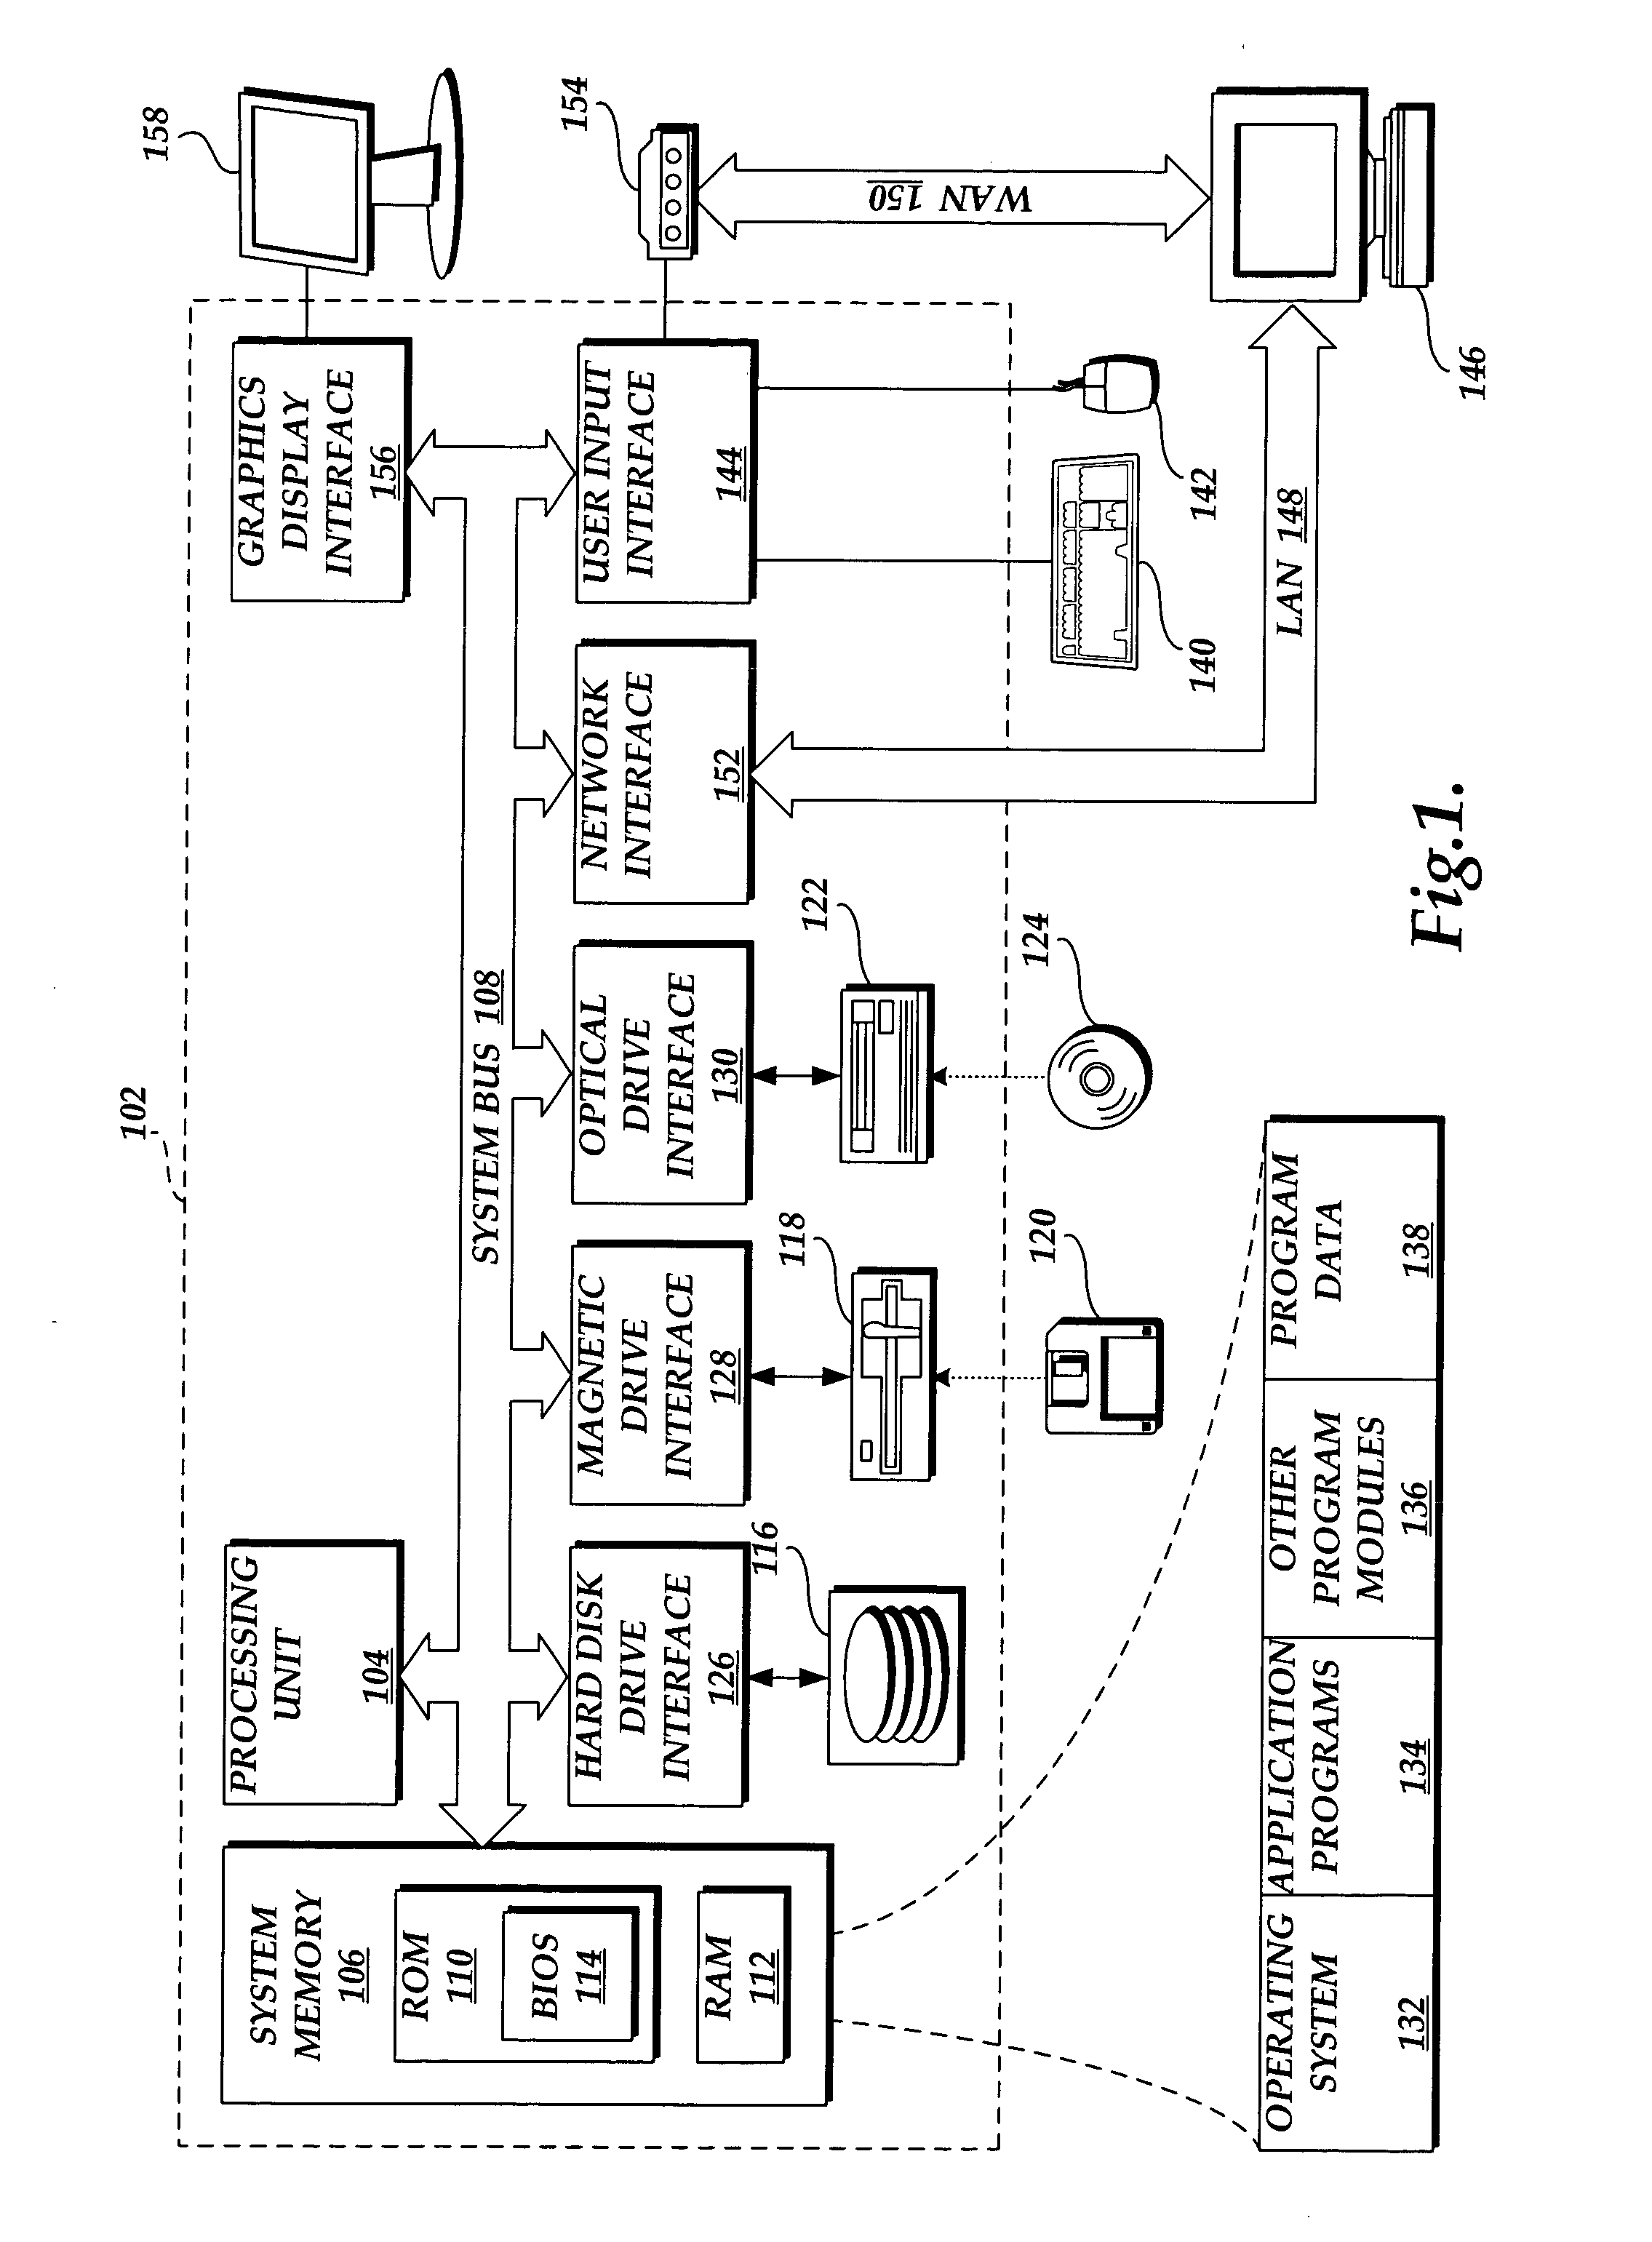 System and method for focused testing of software builds